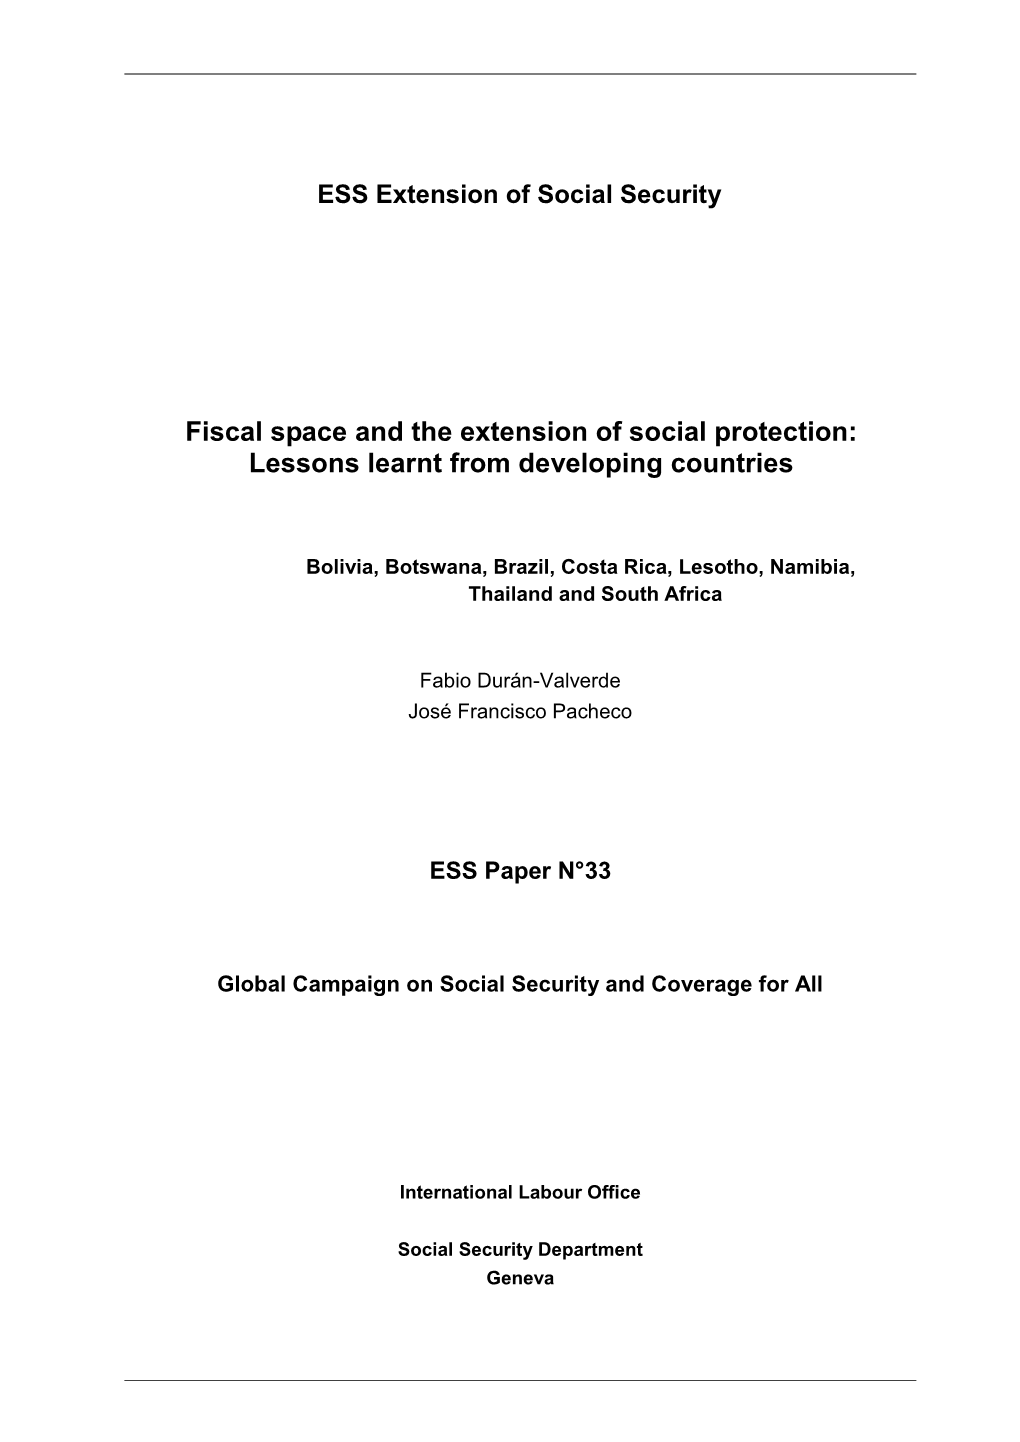 Fiscal Space and the Extension of Social Protection: Lessons Learnt from Developing Countries